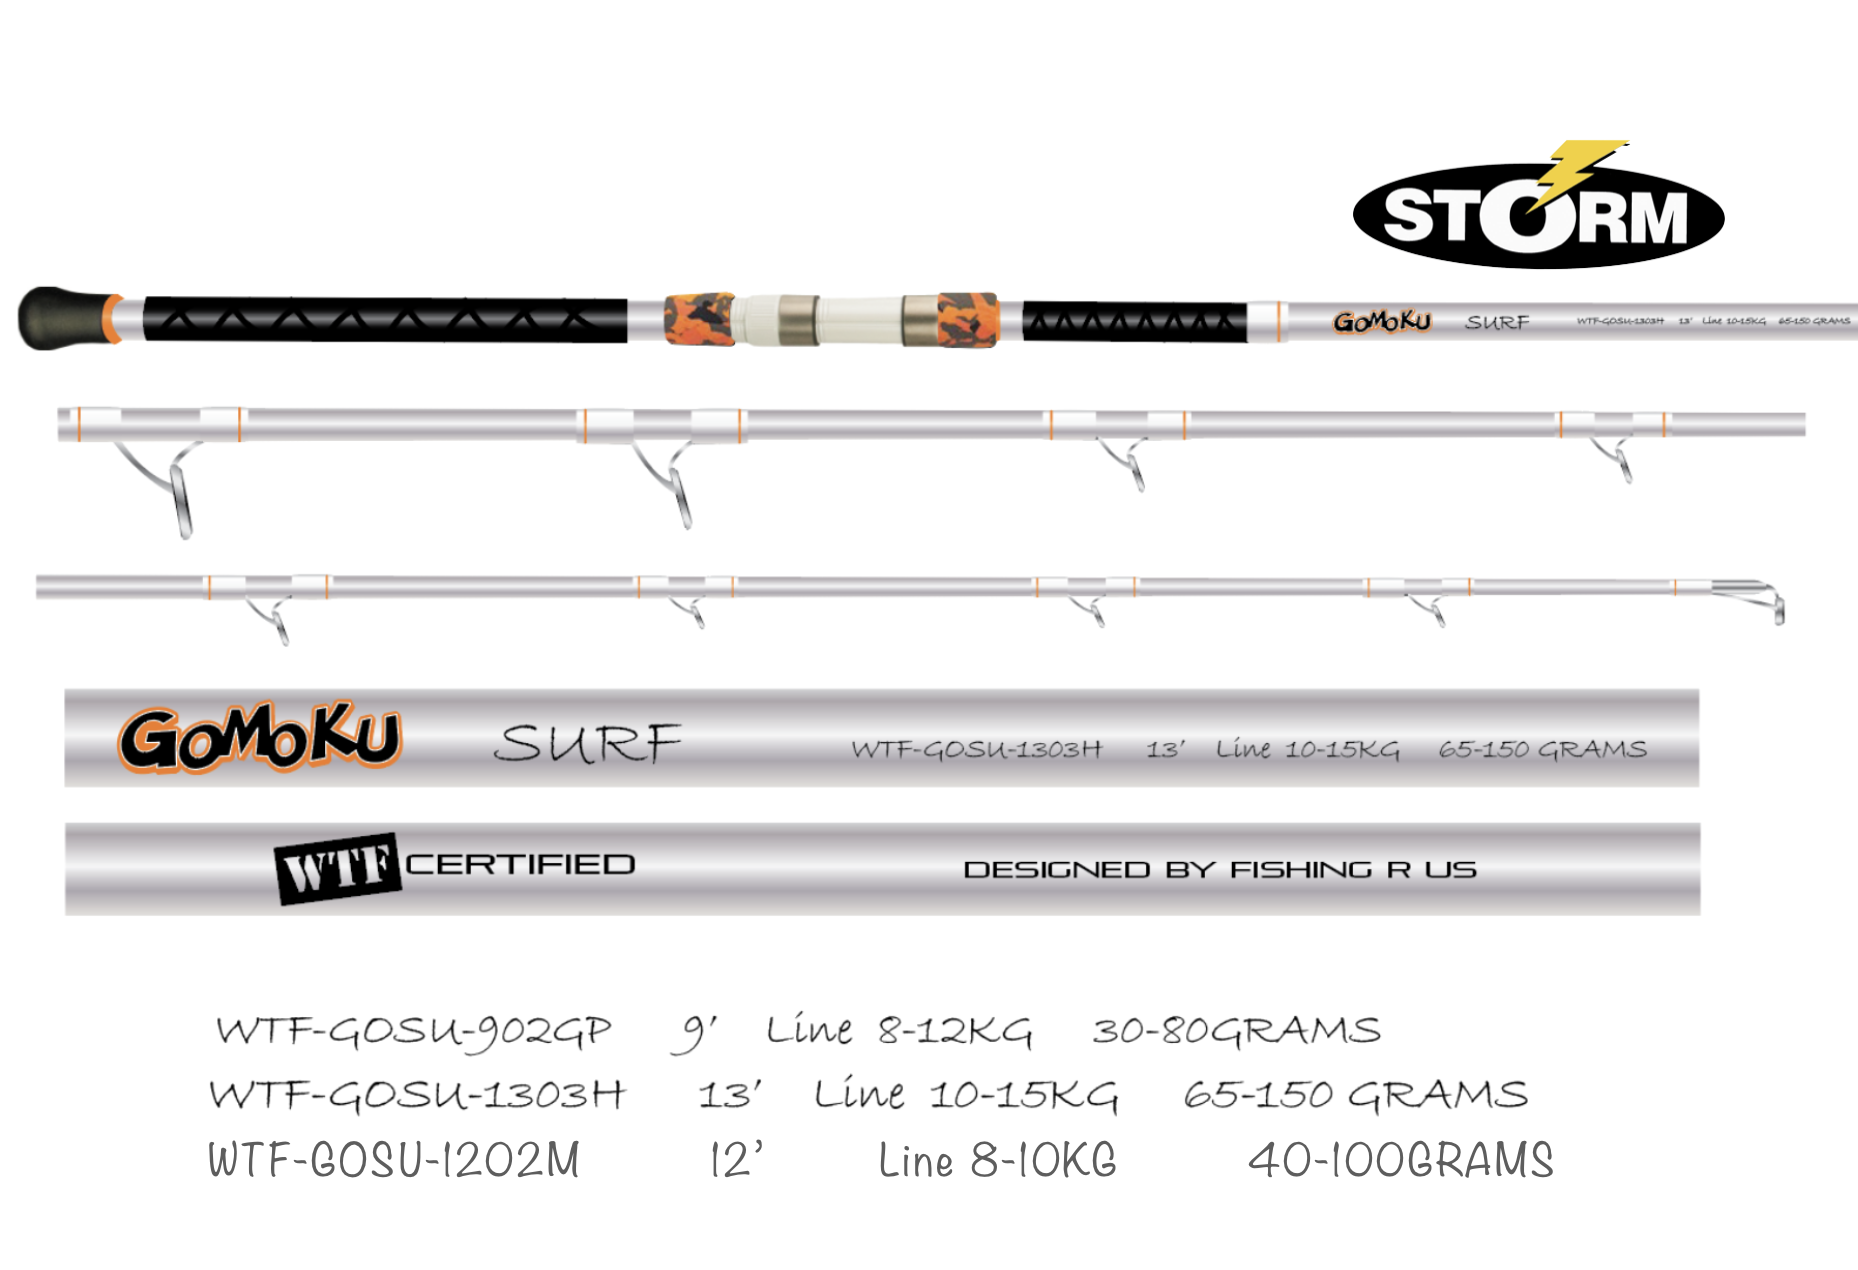 NEW STORM GOMOKU SURF RODS DESIGNED BY FISHING R US - 3 SIZES